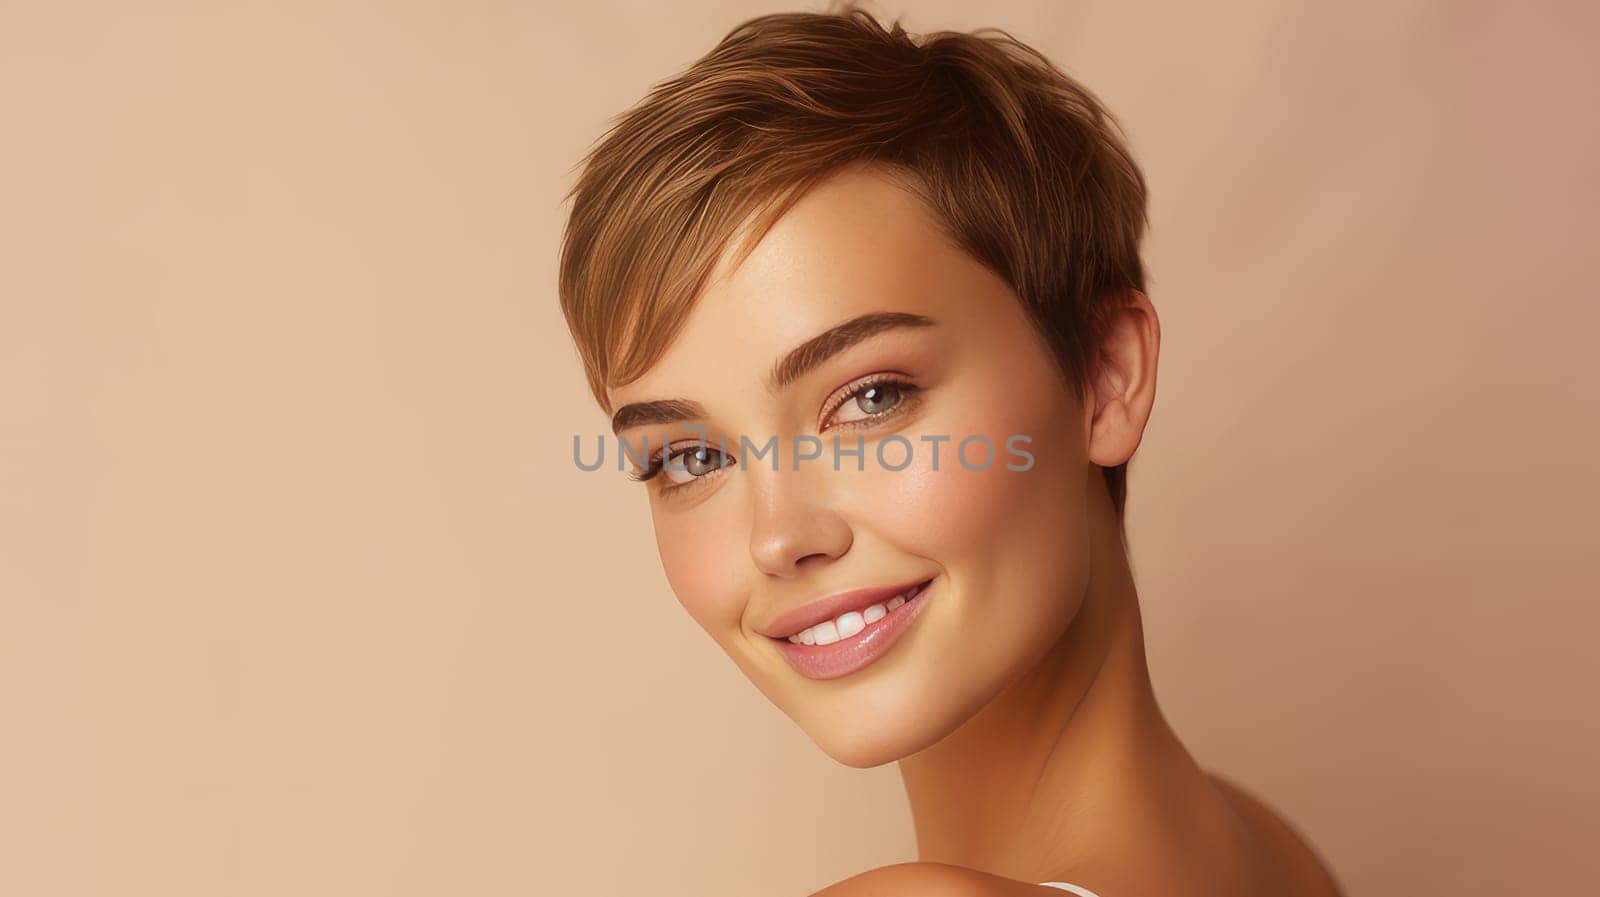 Portrait of a beautiful, smiling Caucasian woman with perfect skin and short haircut, on a creamy beige background. Advertising of cosmetic products, spa treatments, shampoos and hair care, dentistry and medicine, perfumes and cosmetology for women.